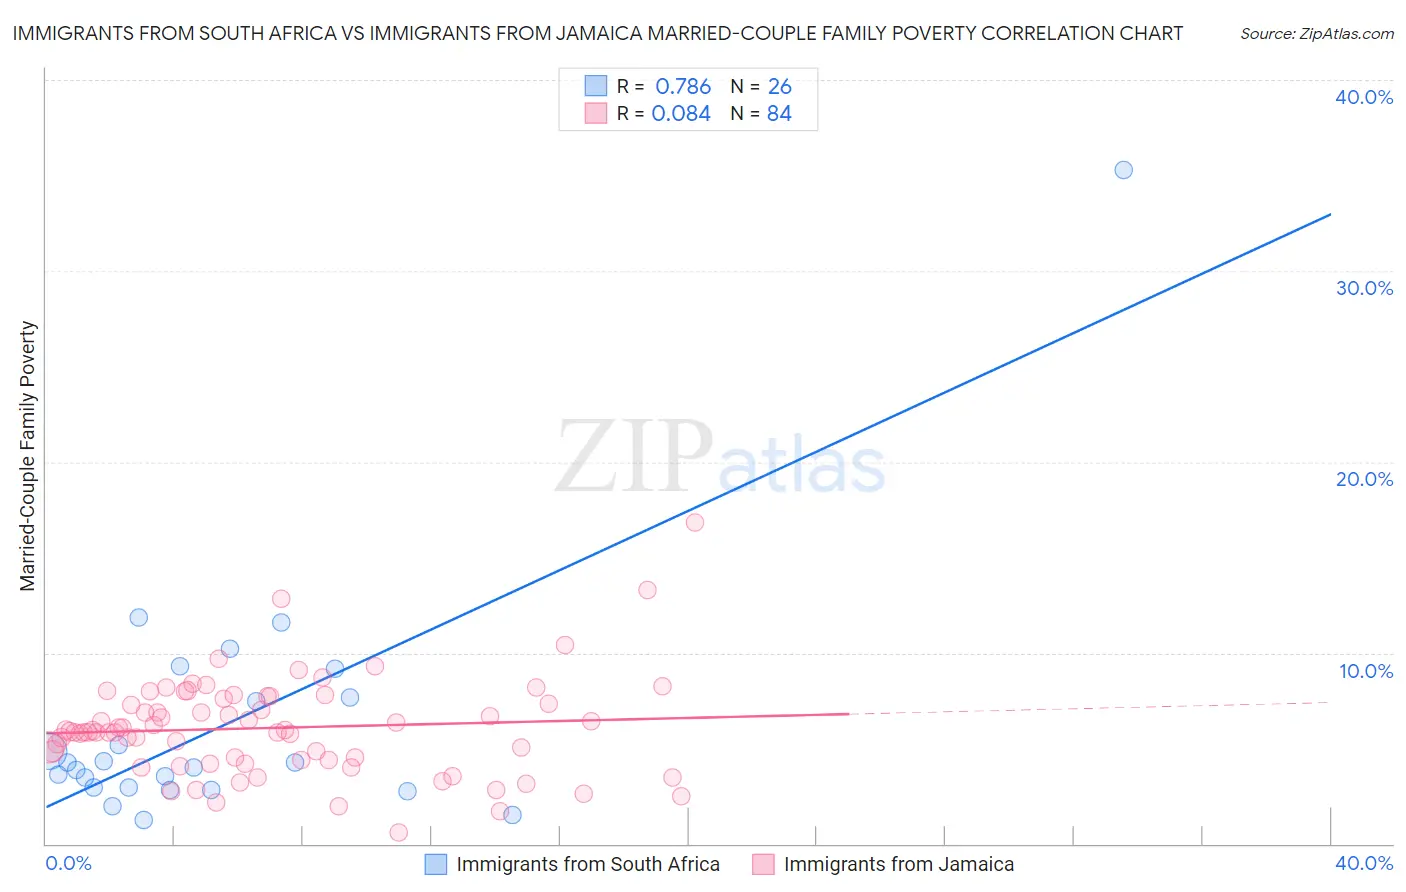 Immigrants from South Africa vs Immigrants from Jamaica Married-Couple Family Poverty